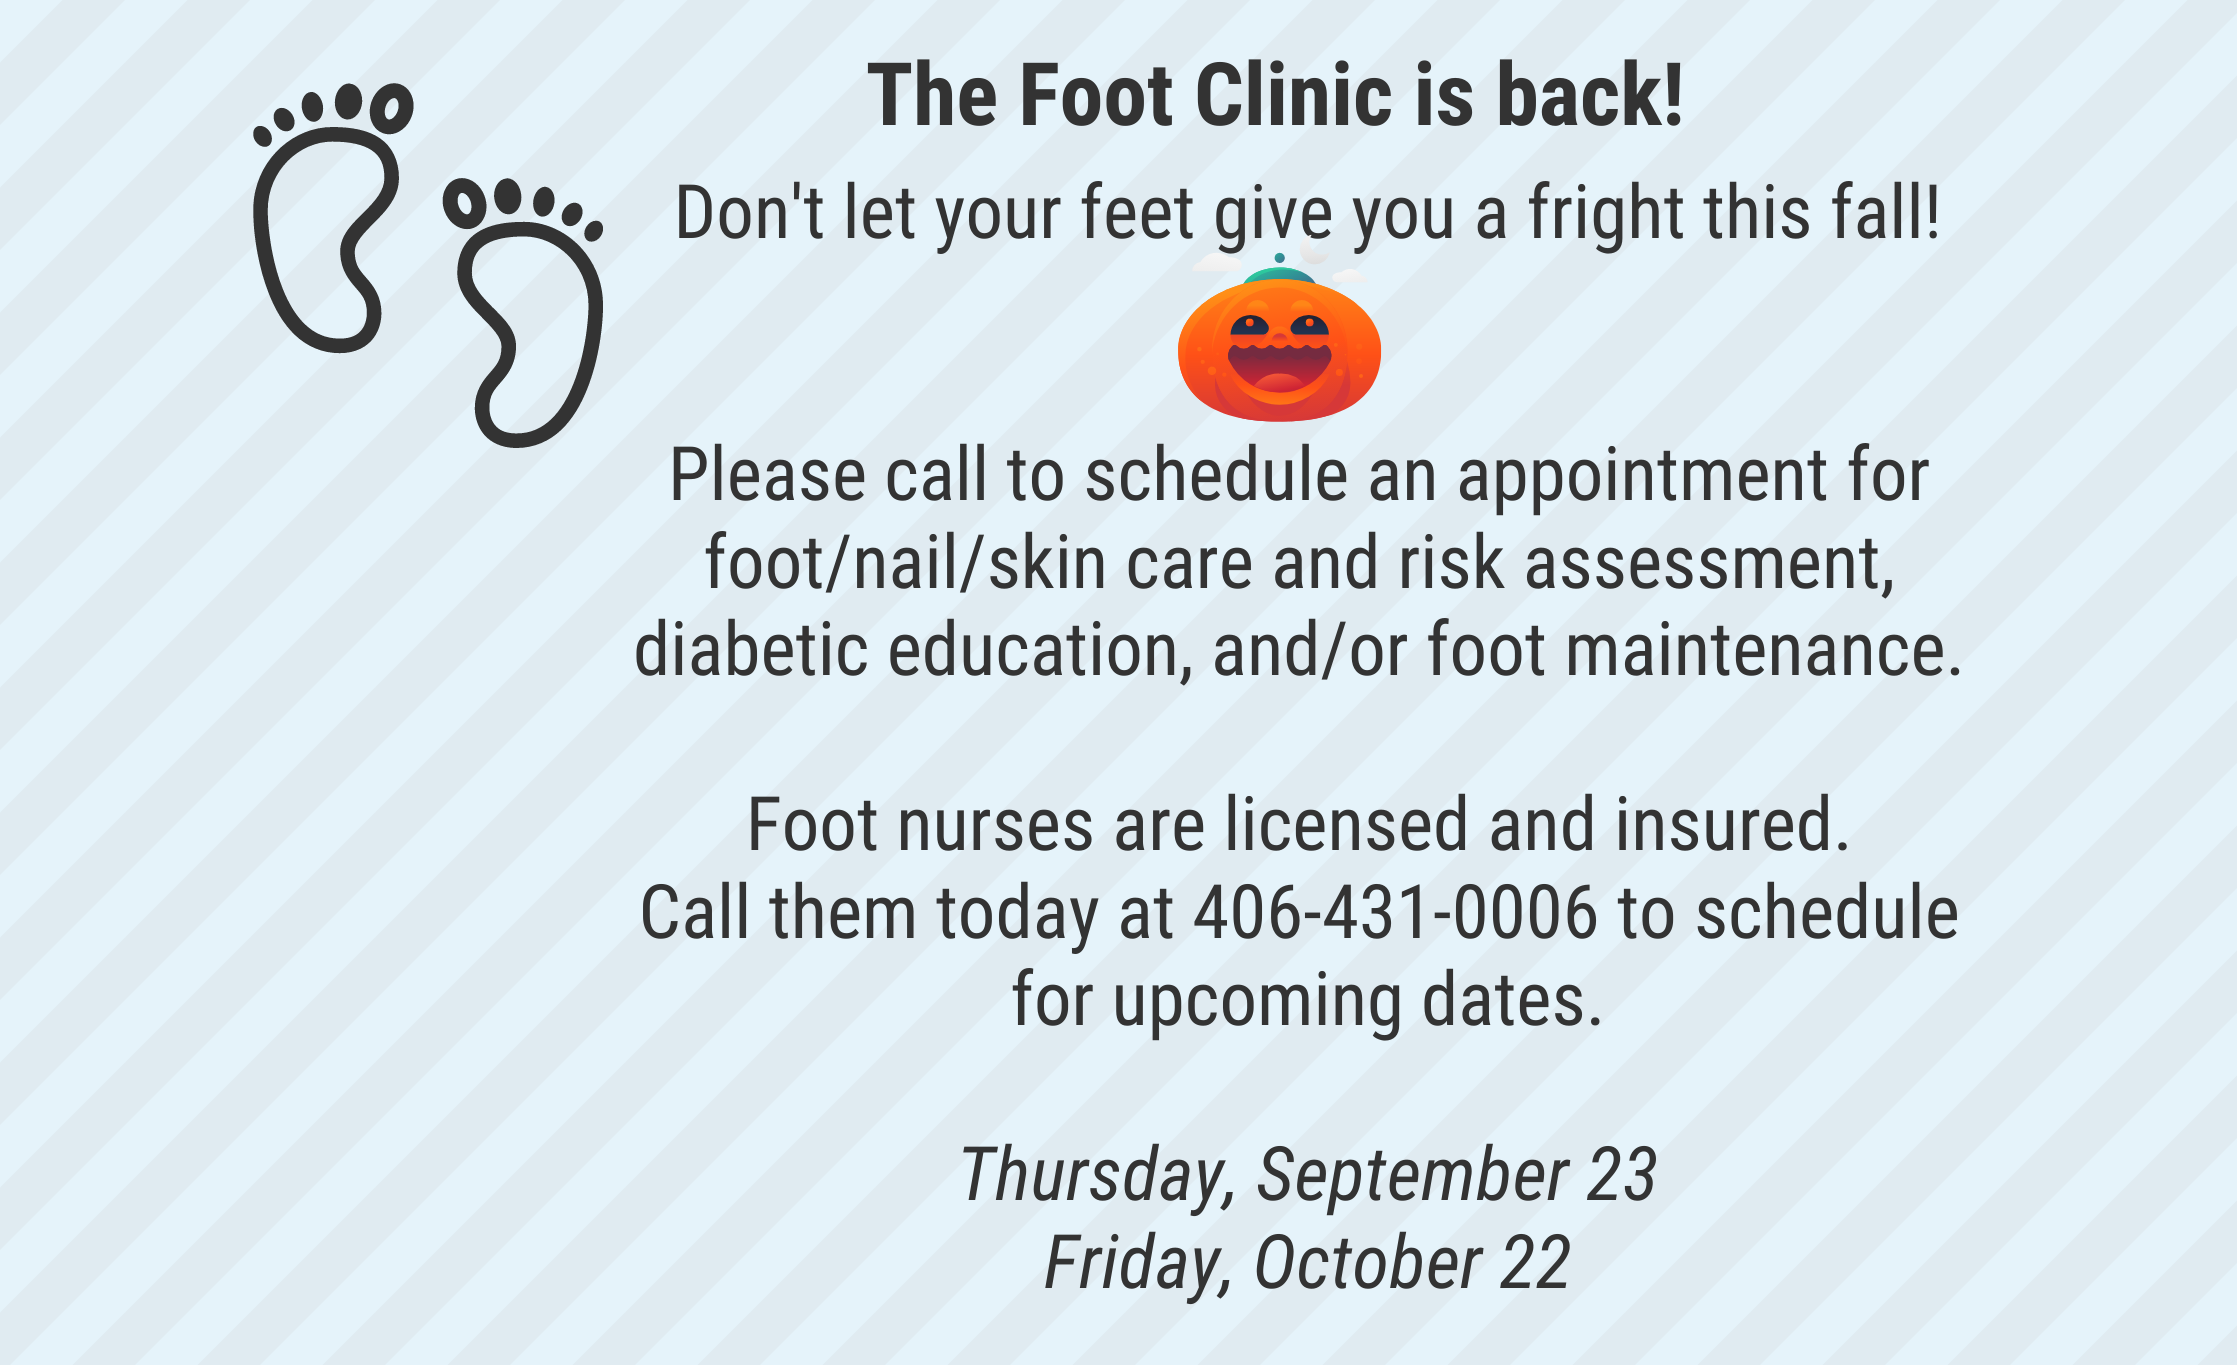 Please call to schedule an appointment for foot/nail/skin care and risk assessment, diabetic education, and/or foot maintenance.